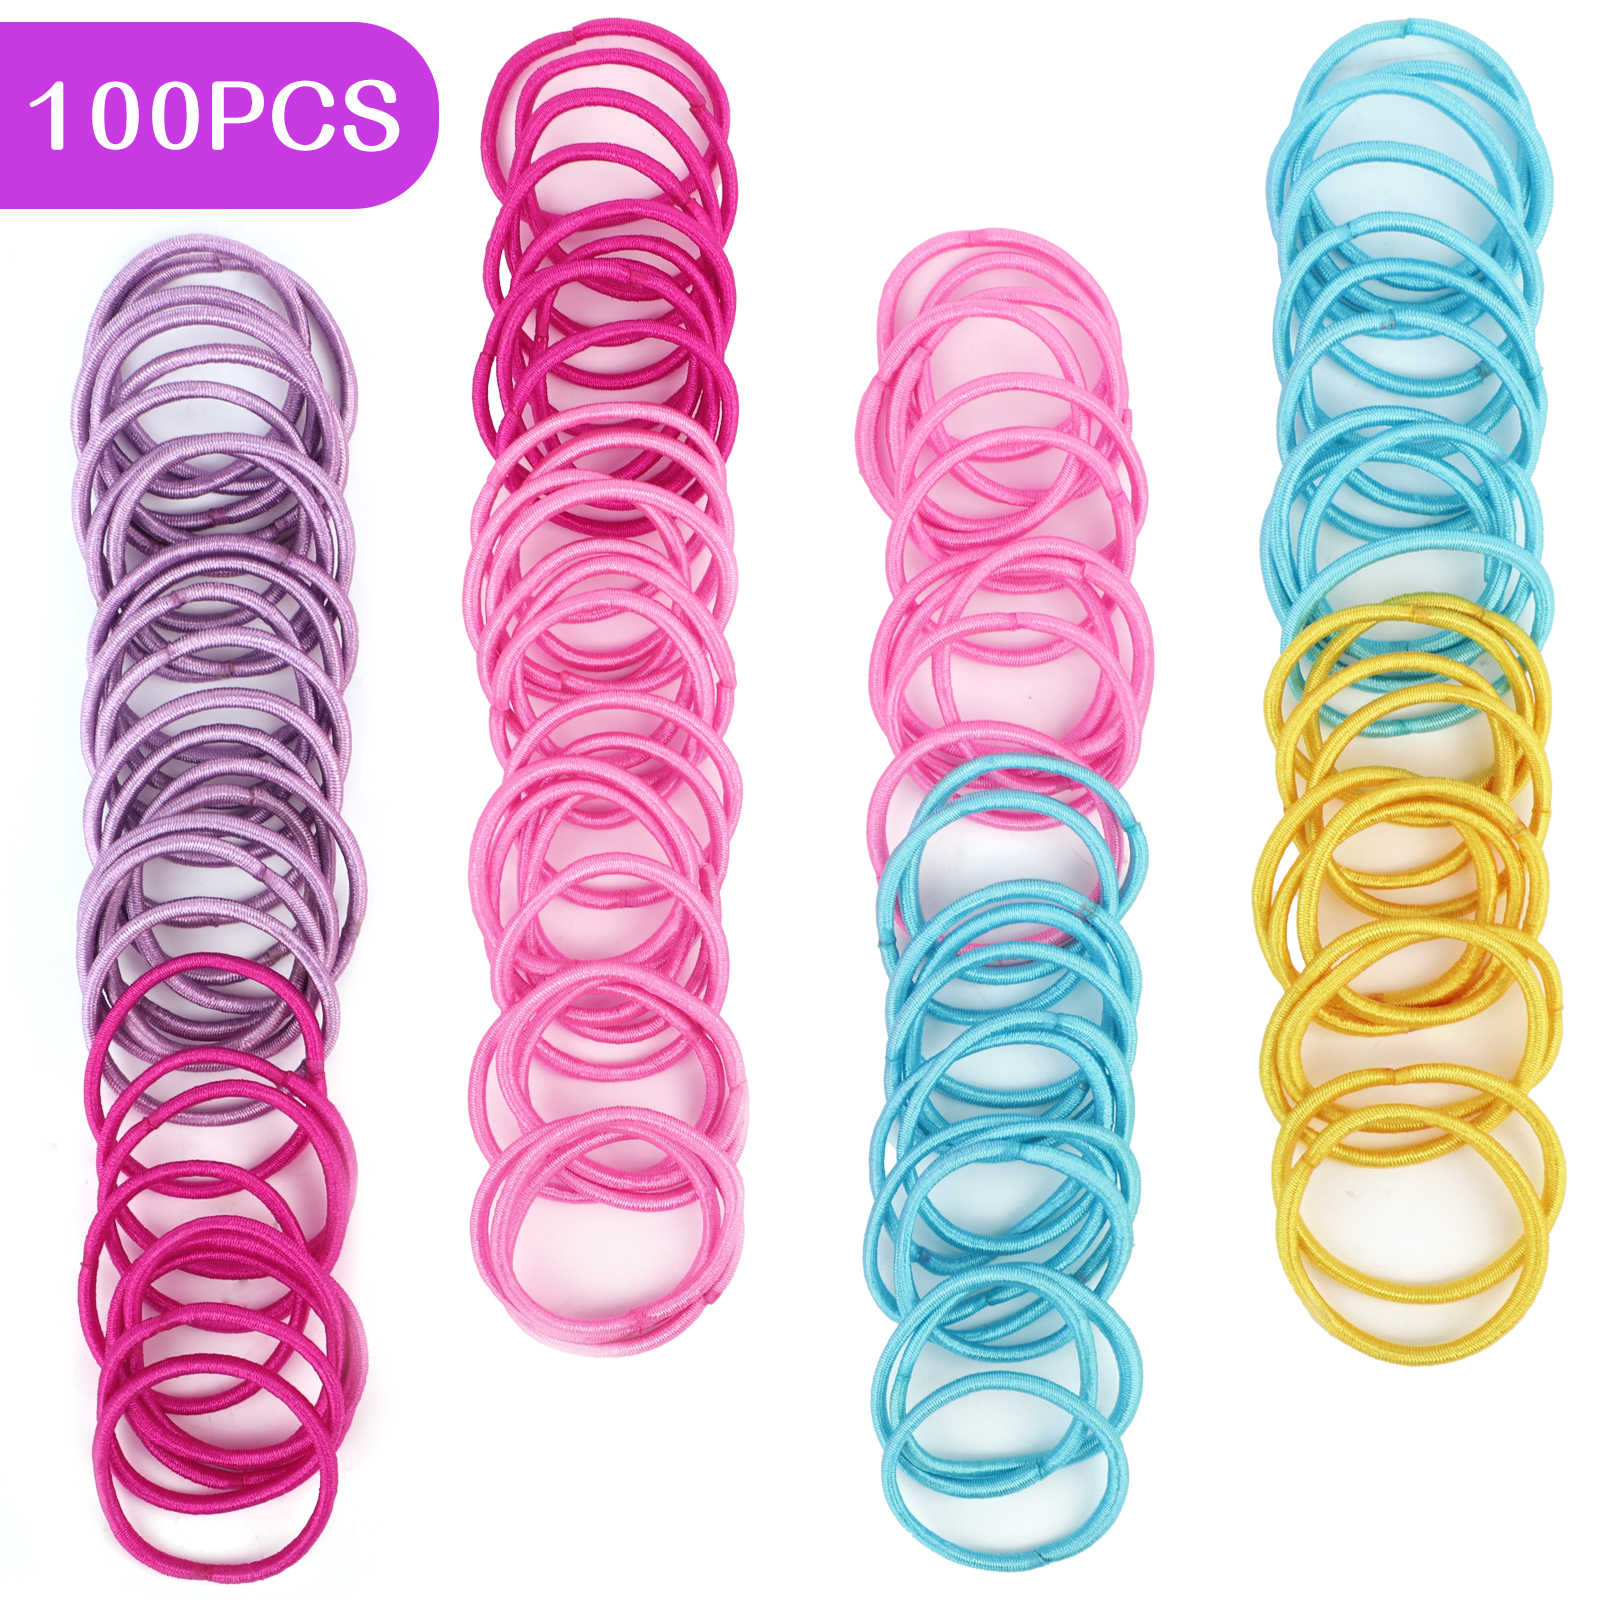 TSV 100pcs Girls Rubber Hair Ties, Colorful Small Seamless Hairbands, Elastic Ponytail Holders - image 1 of 8